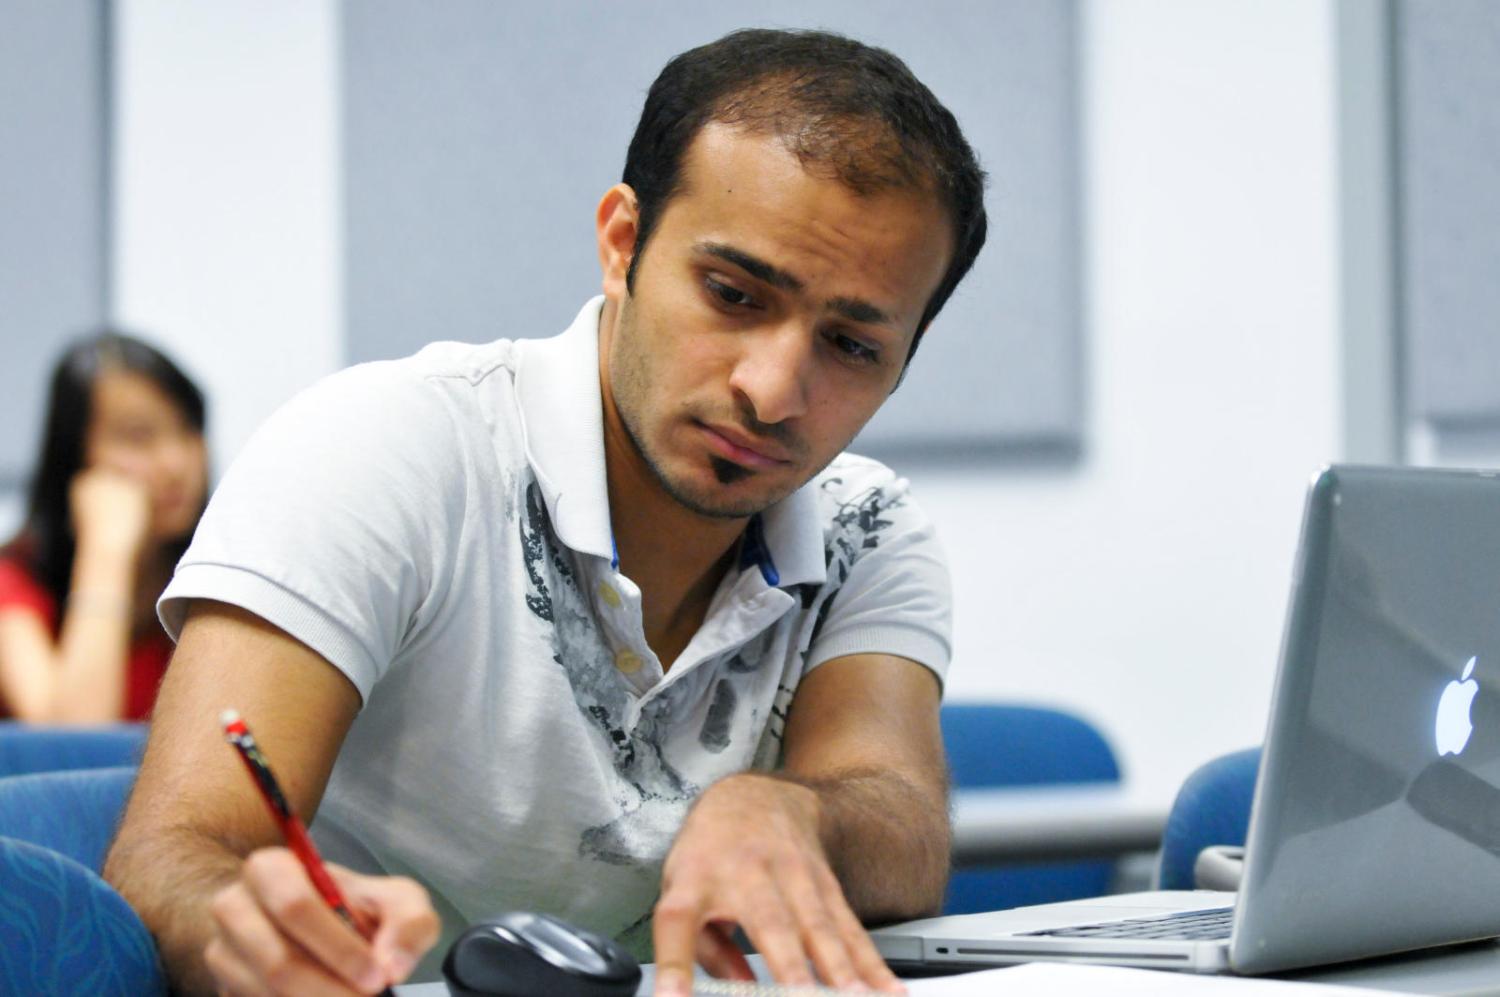 Student holding a pen and writing in front of a computer